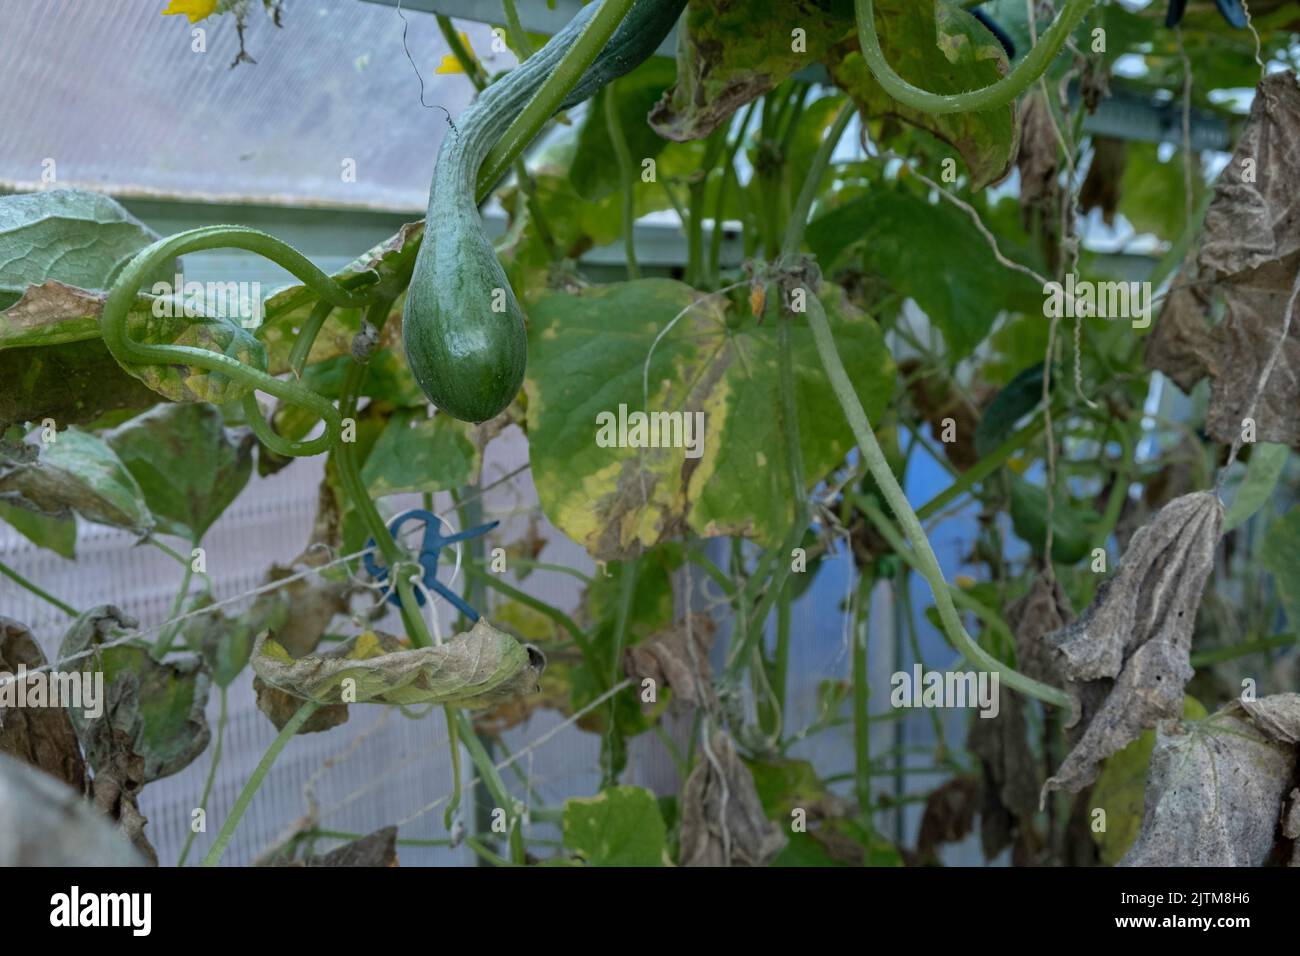 Damage after flood crisis. Destroyed harvest of cucumbers. Stock Photo